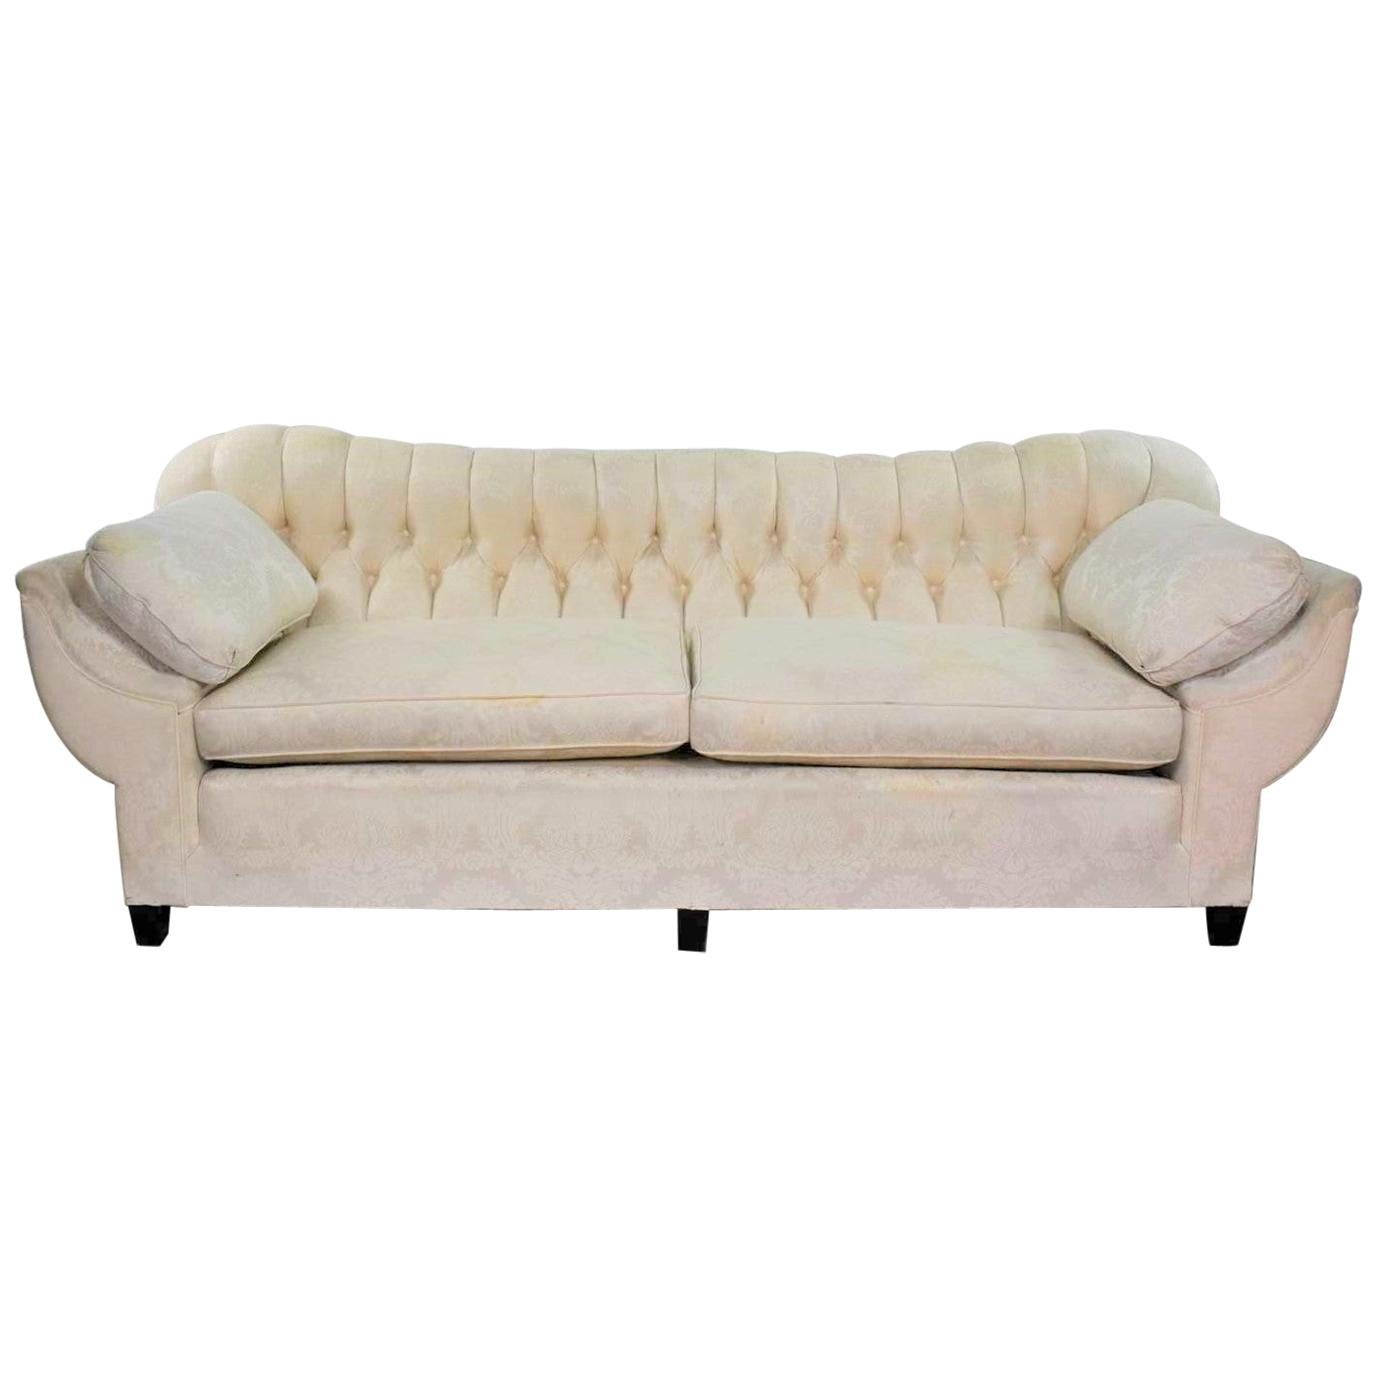 Vintage Art Deco Hollywood Regency Sofa Tufted Back and Concave Pillowed Arms